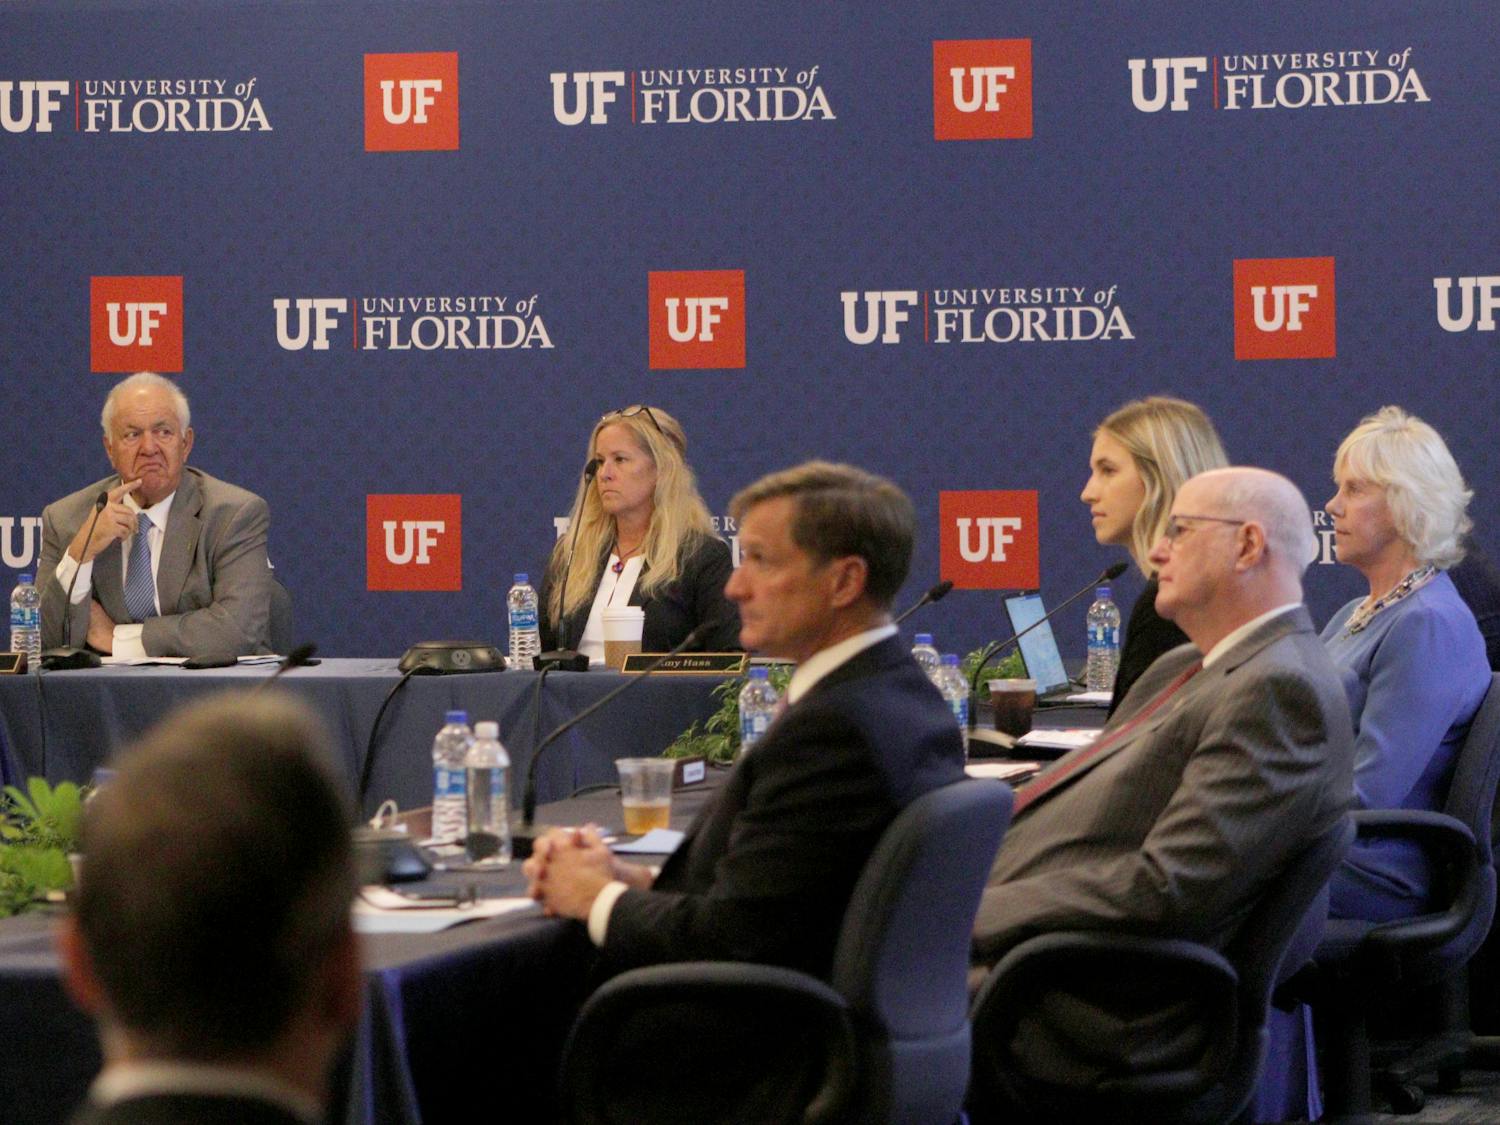 The UF Board of Trustees listen to public comment at its meeting where Ben Sasse's candidacy is being discussed at Emerson Alumni Hall Tuesday, Nov. 1, 2022.